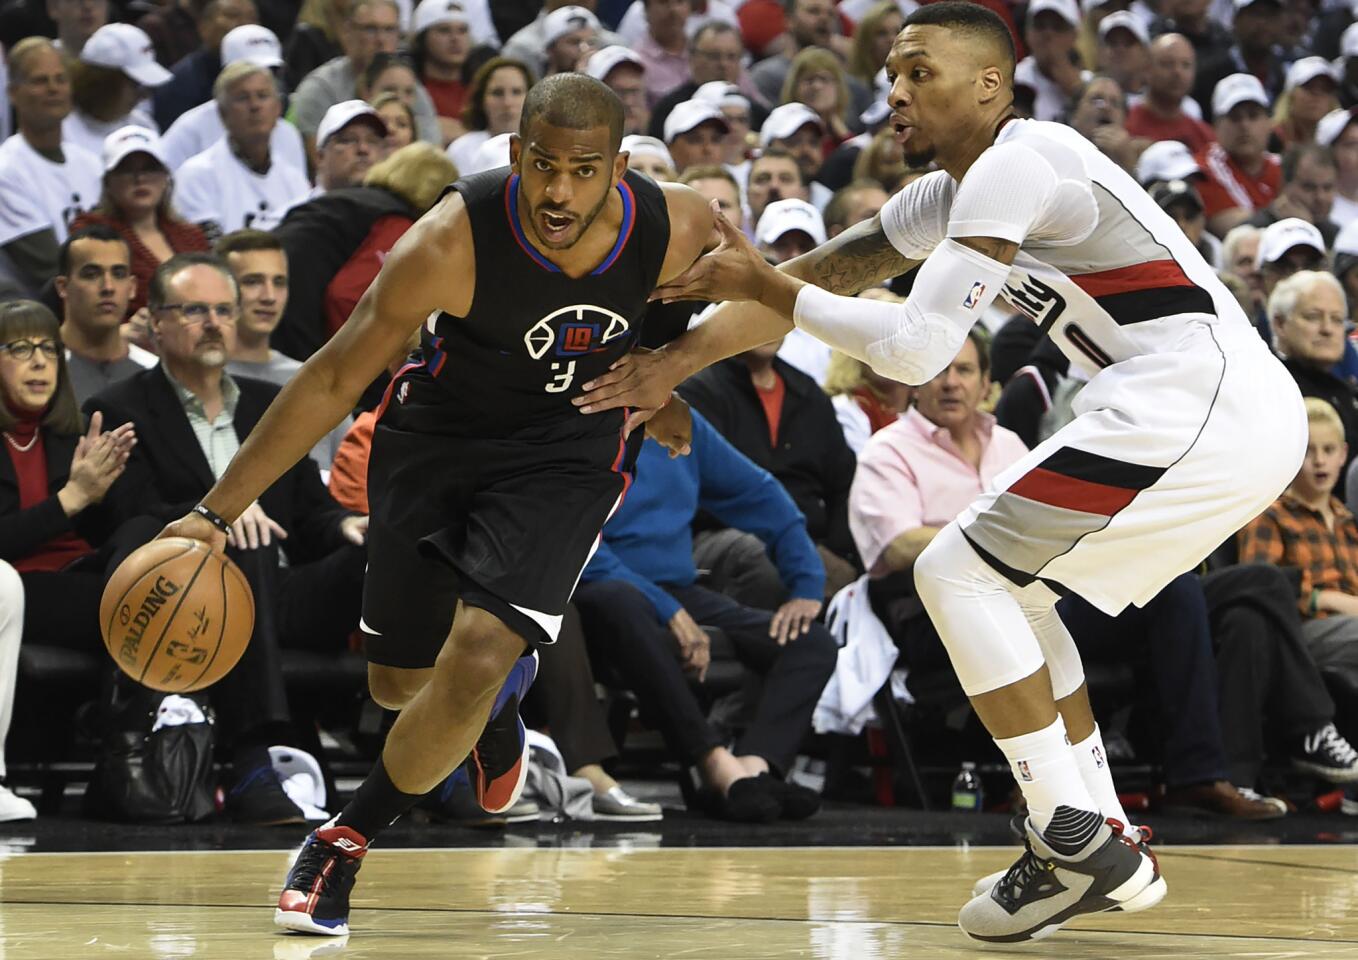 There's still no place like home for the Trail Blazers, as the Clippers are finding out